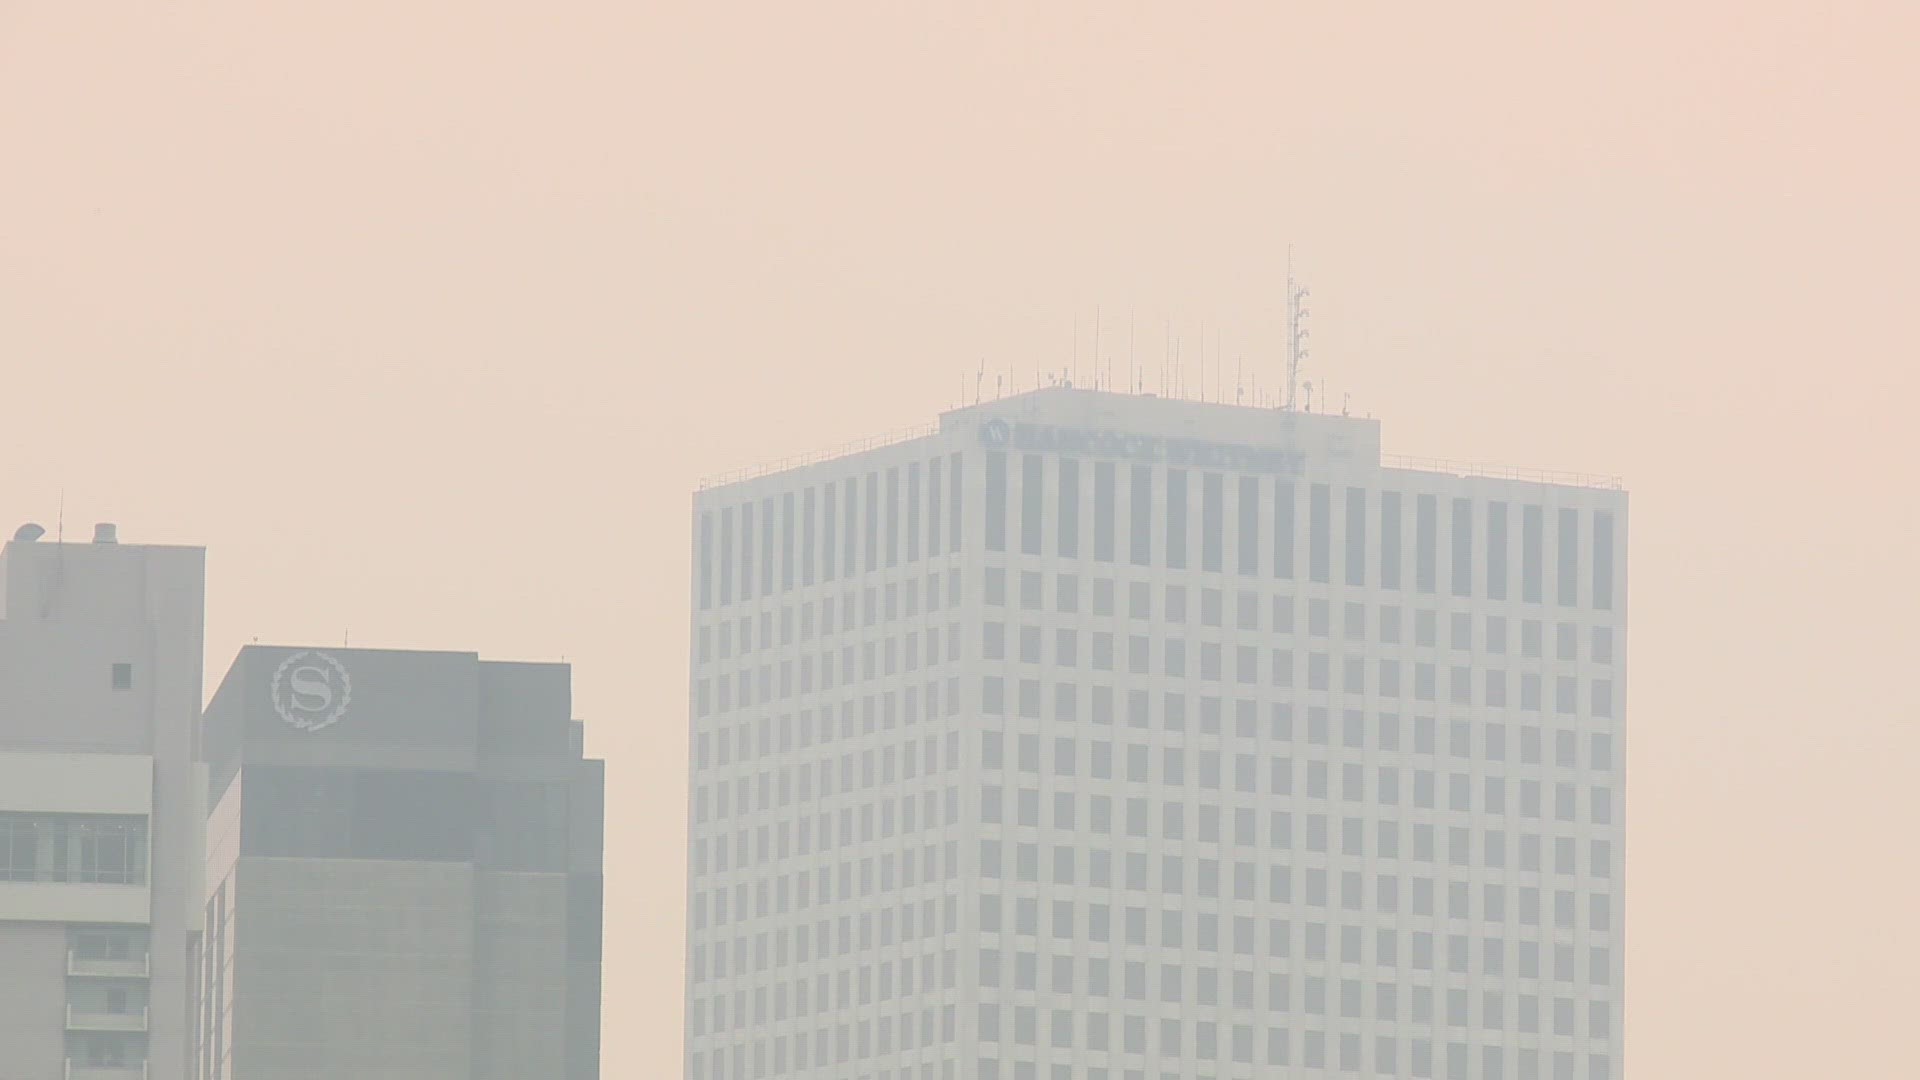 WWL-TV's Meg Farris with insights on how poor air quality caused by wildfire smoke and fog can cause breathing problems for residents in the New Orleans Metro.